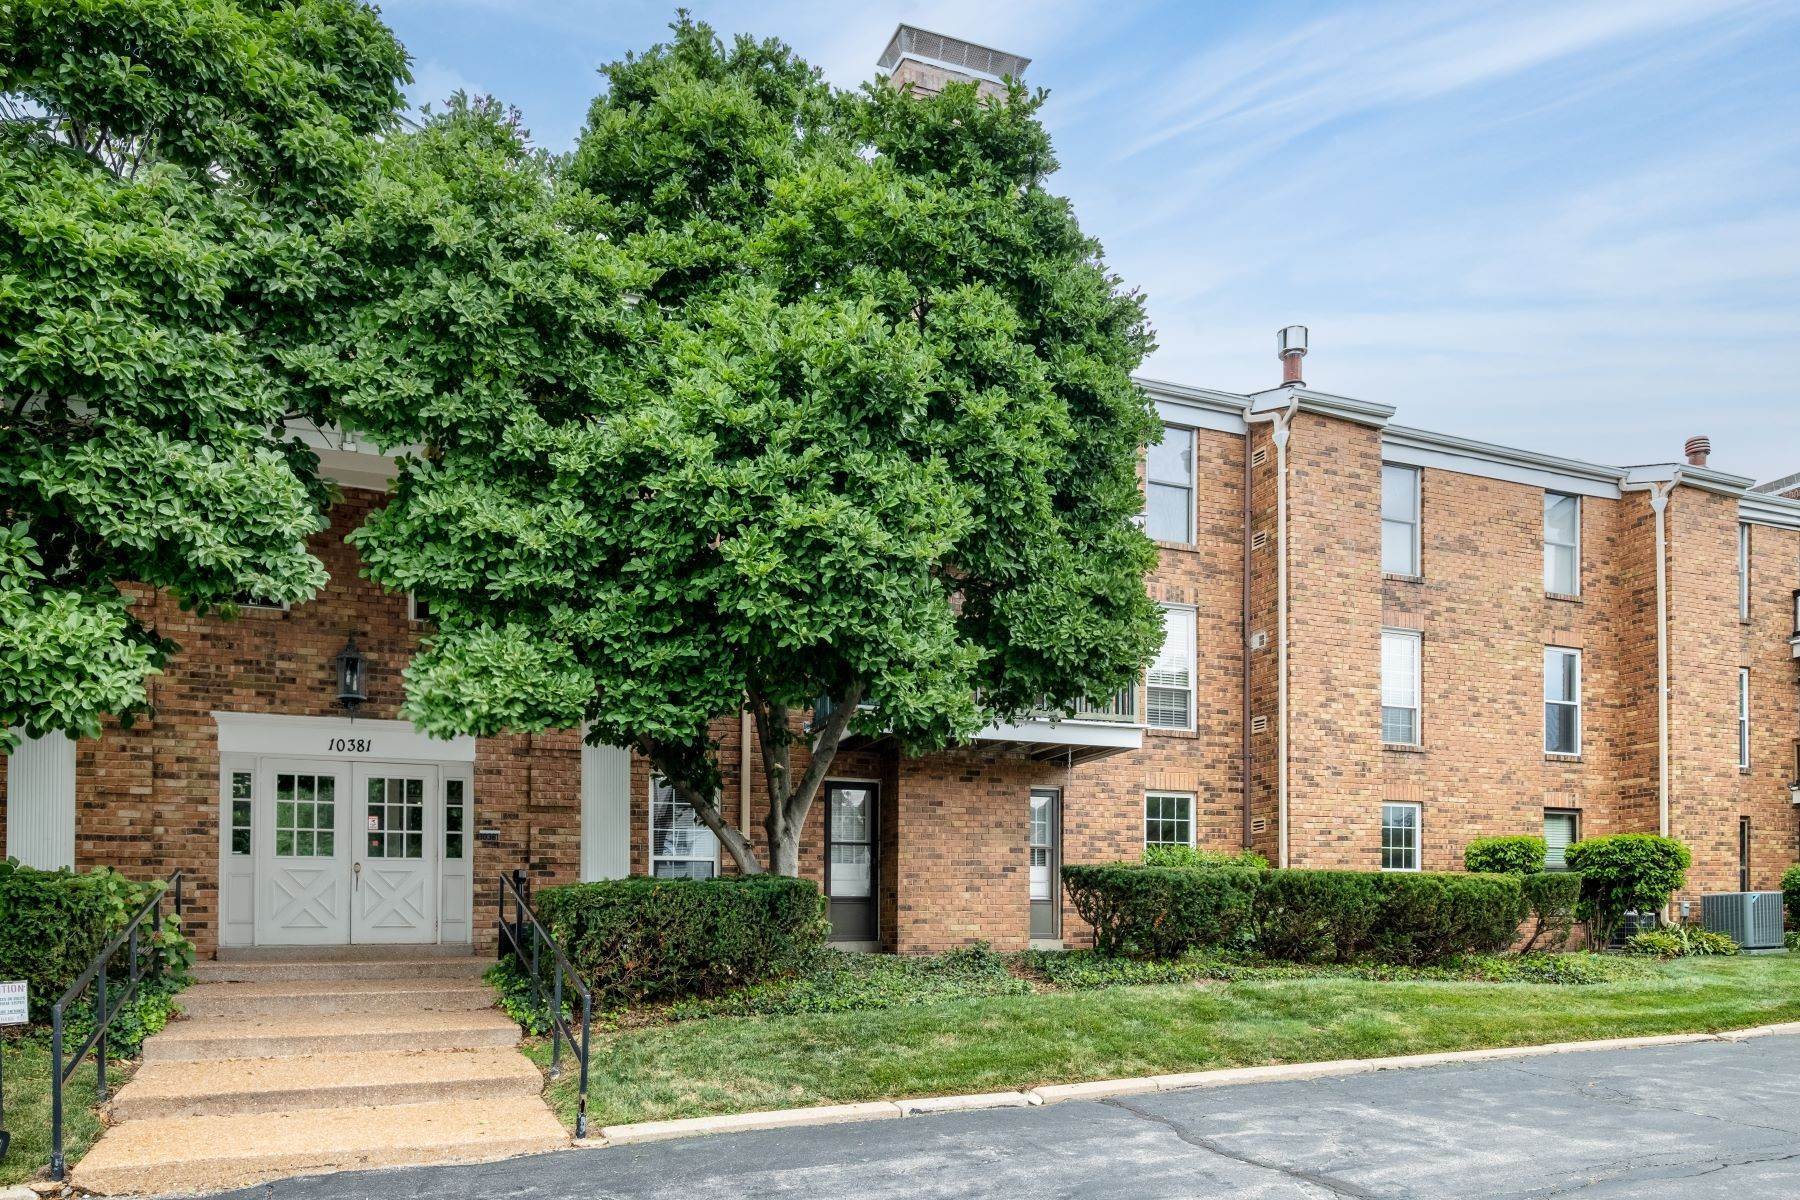 Condominiums for Sale at Location, Location 2bed/2 bath condo in Manors of Oxford Hill 10381 Oxford Hill Drive #5 St. Louis, Missouri 63146 United States